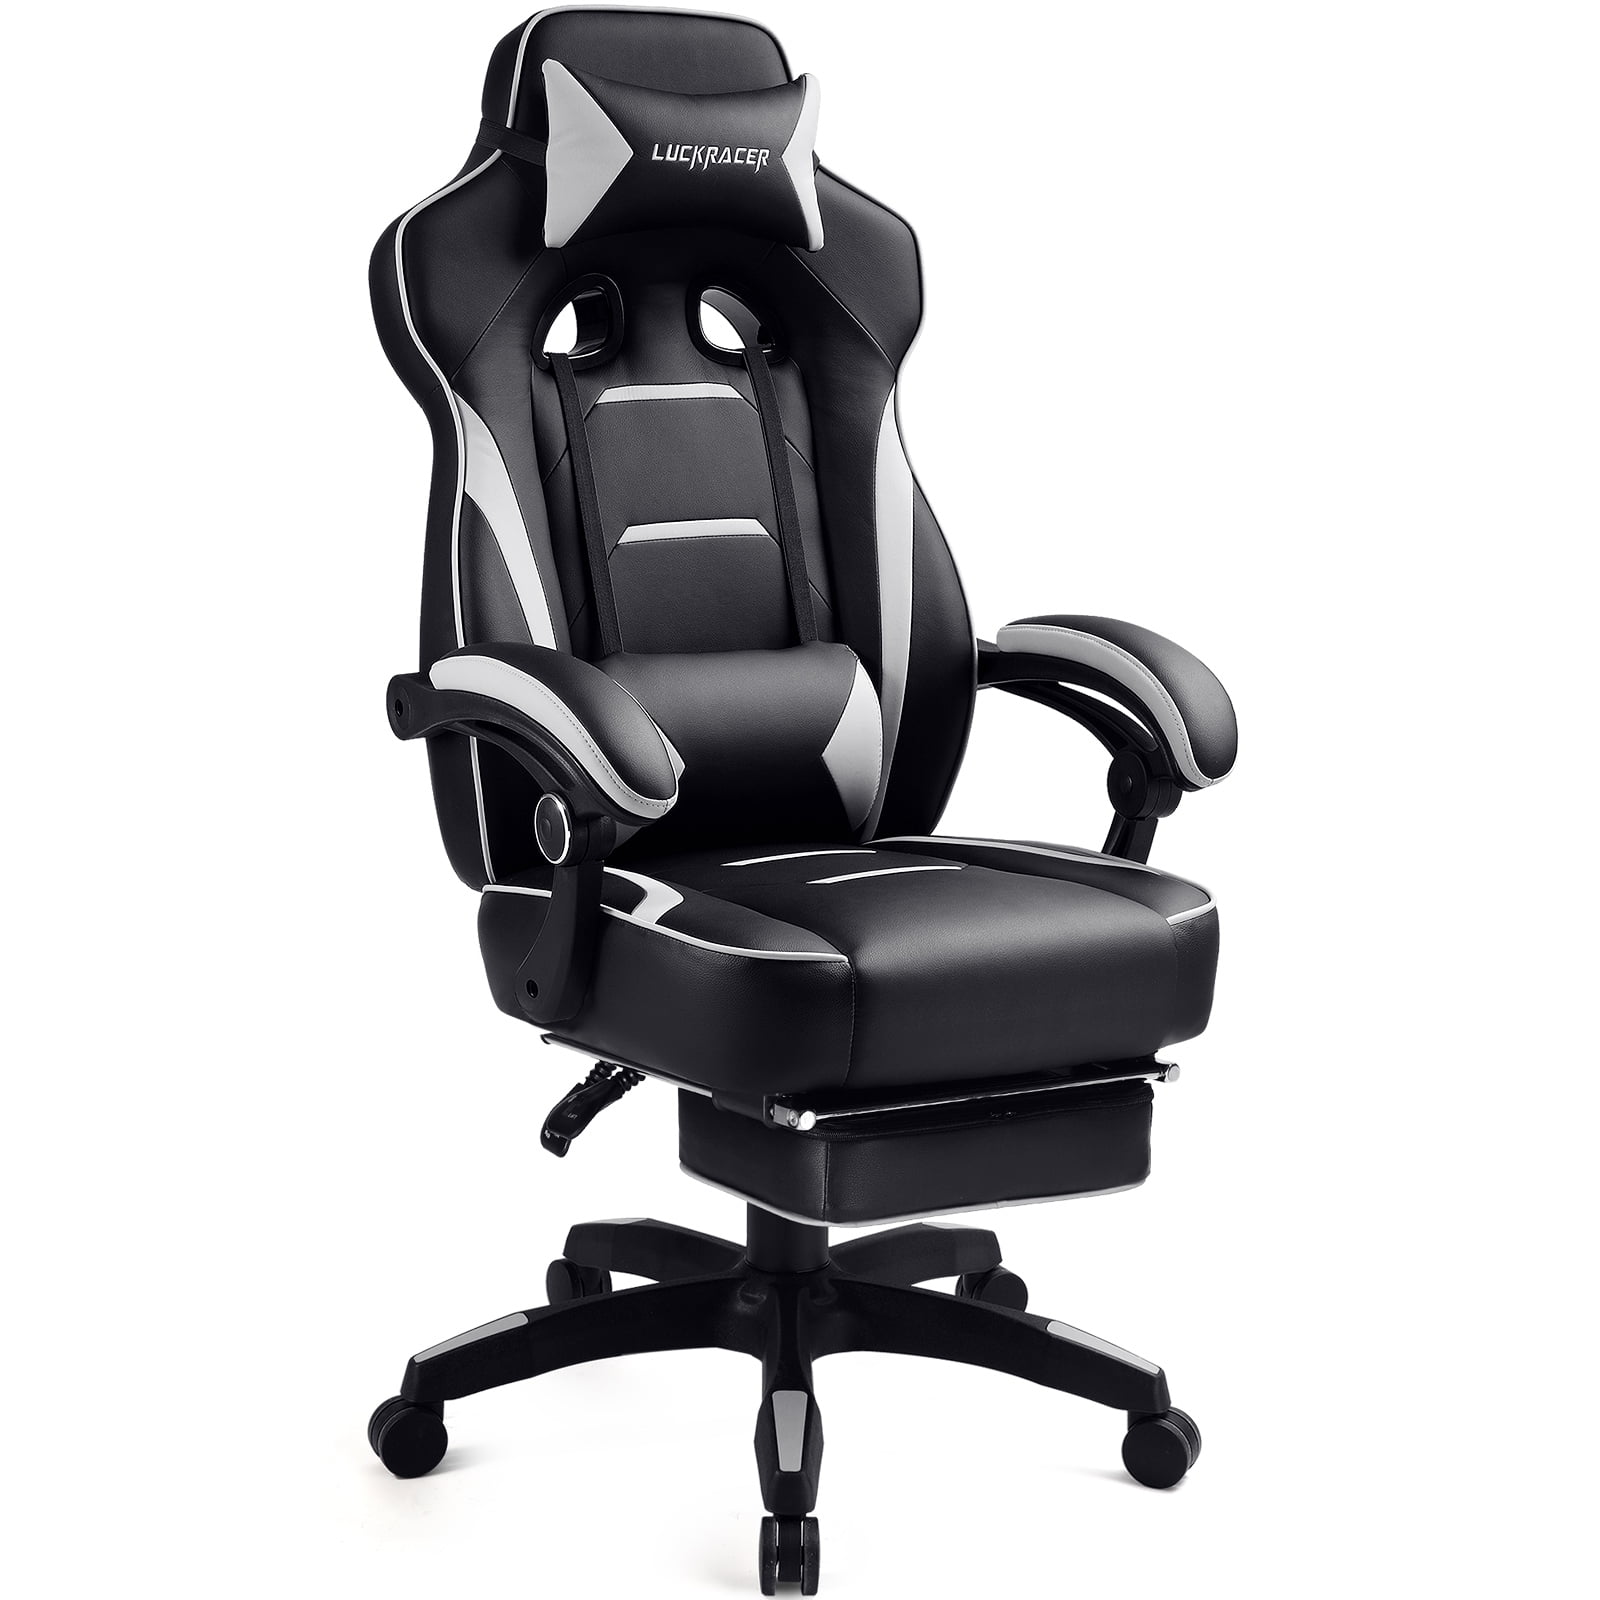 Homy Casa Gaming Chair Ergonomic Computer Chair Faux Leather Office Racing Desk Chair White 